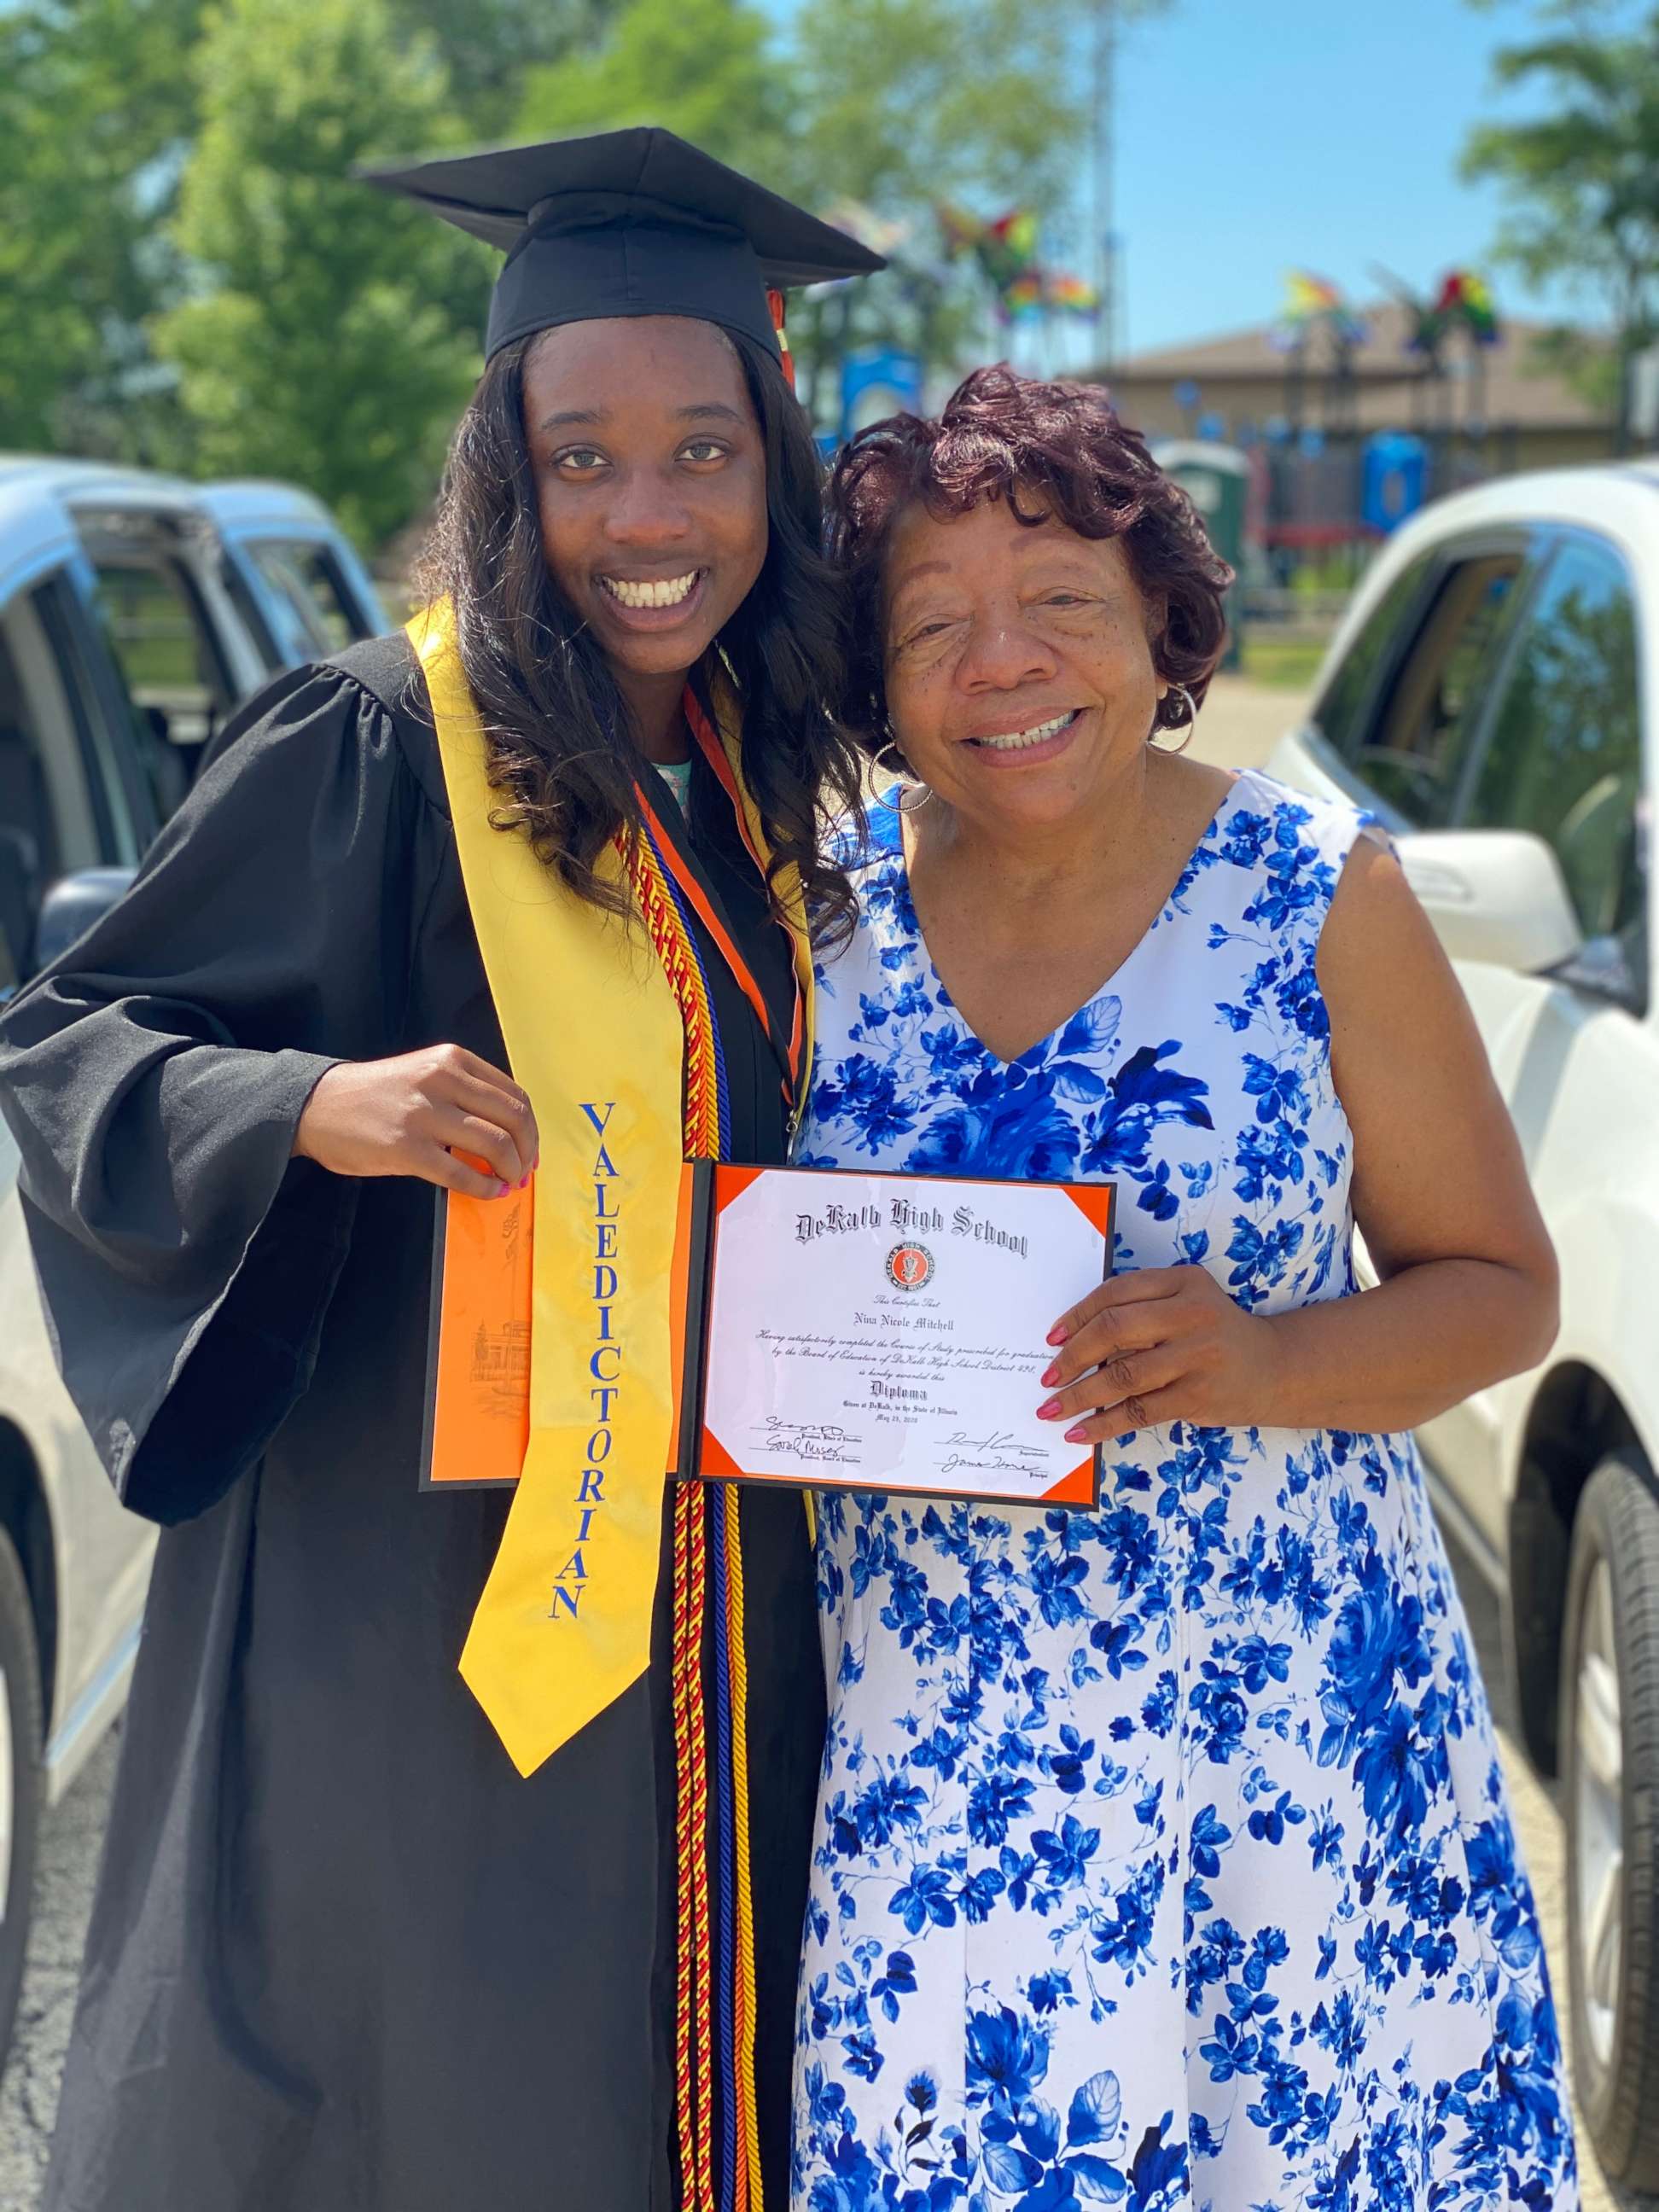 PHOTO: Nina Mitchell, 17, valedictorian of DeKalb High School in DeKalb, Illinois, stands with her grandmother, Pearlene Carter, 75, was also a valedictorian representing Walker High School's class of 1959 in Coldwater, Mississippi.